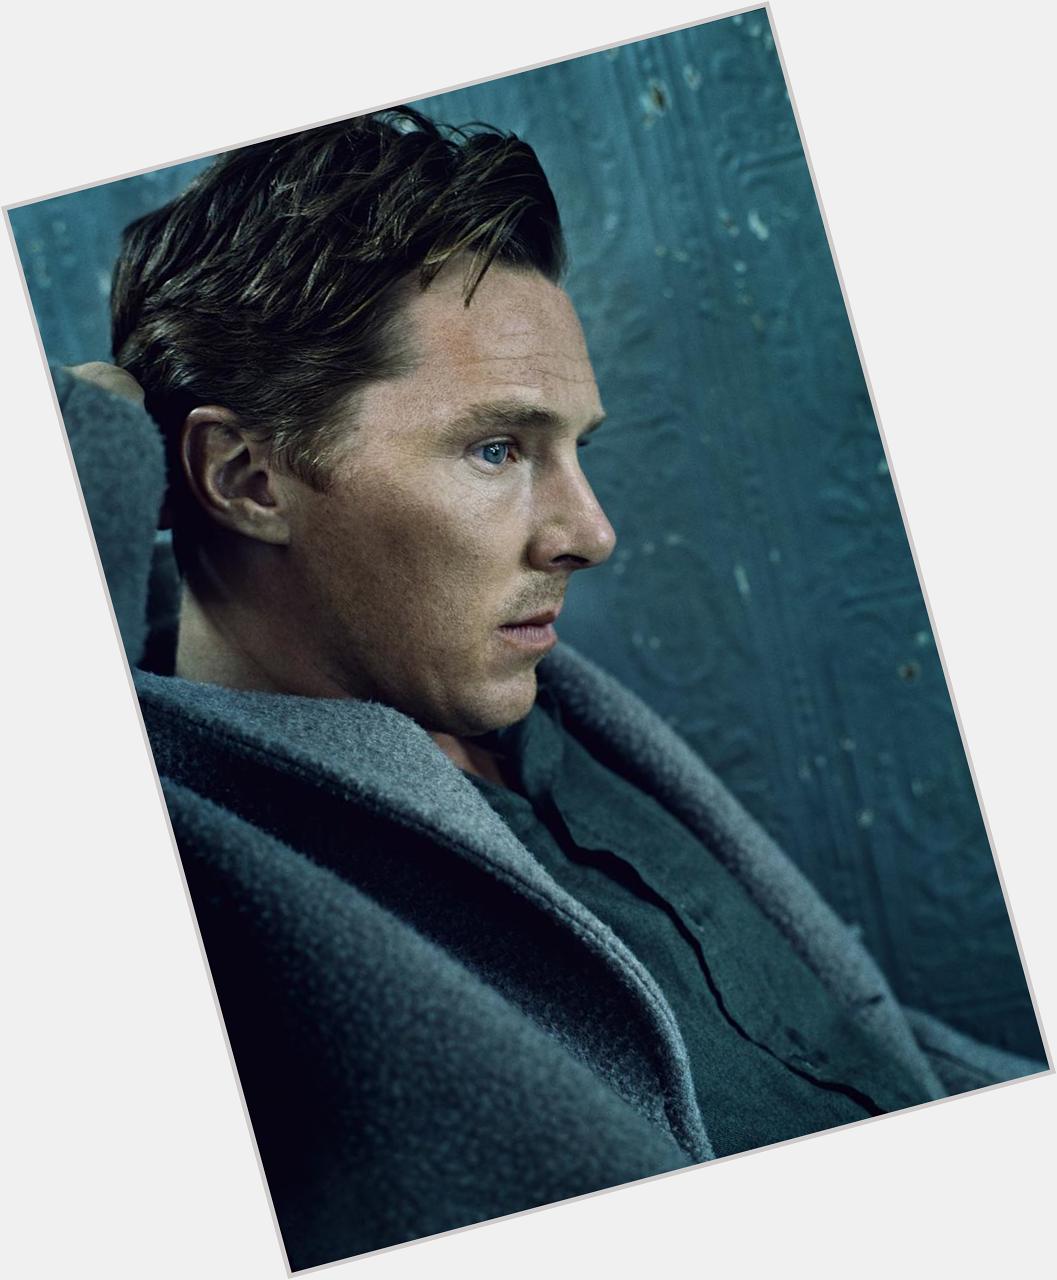 Happy birthday to Benedict Cumberbatch, an actor who never ceases to amaze us.

July 19, 1976. 